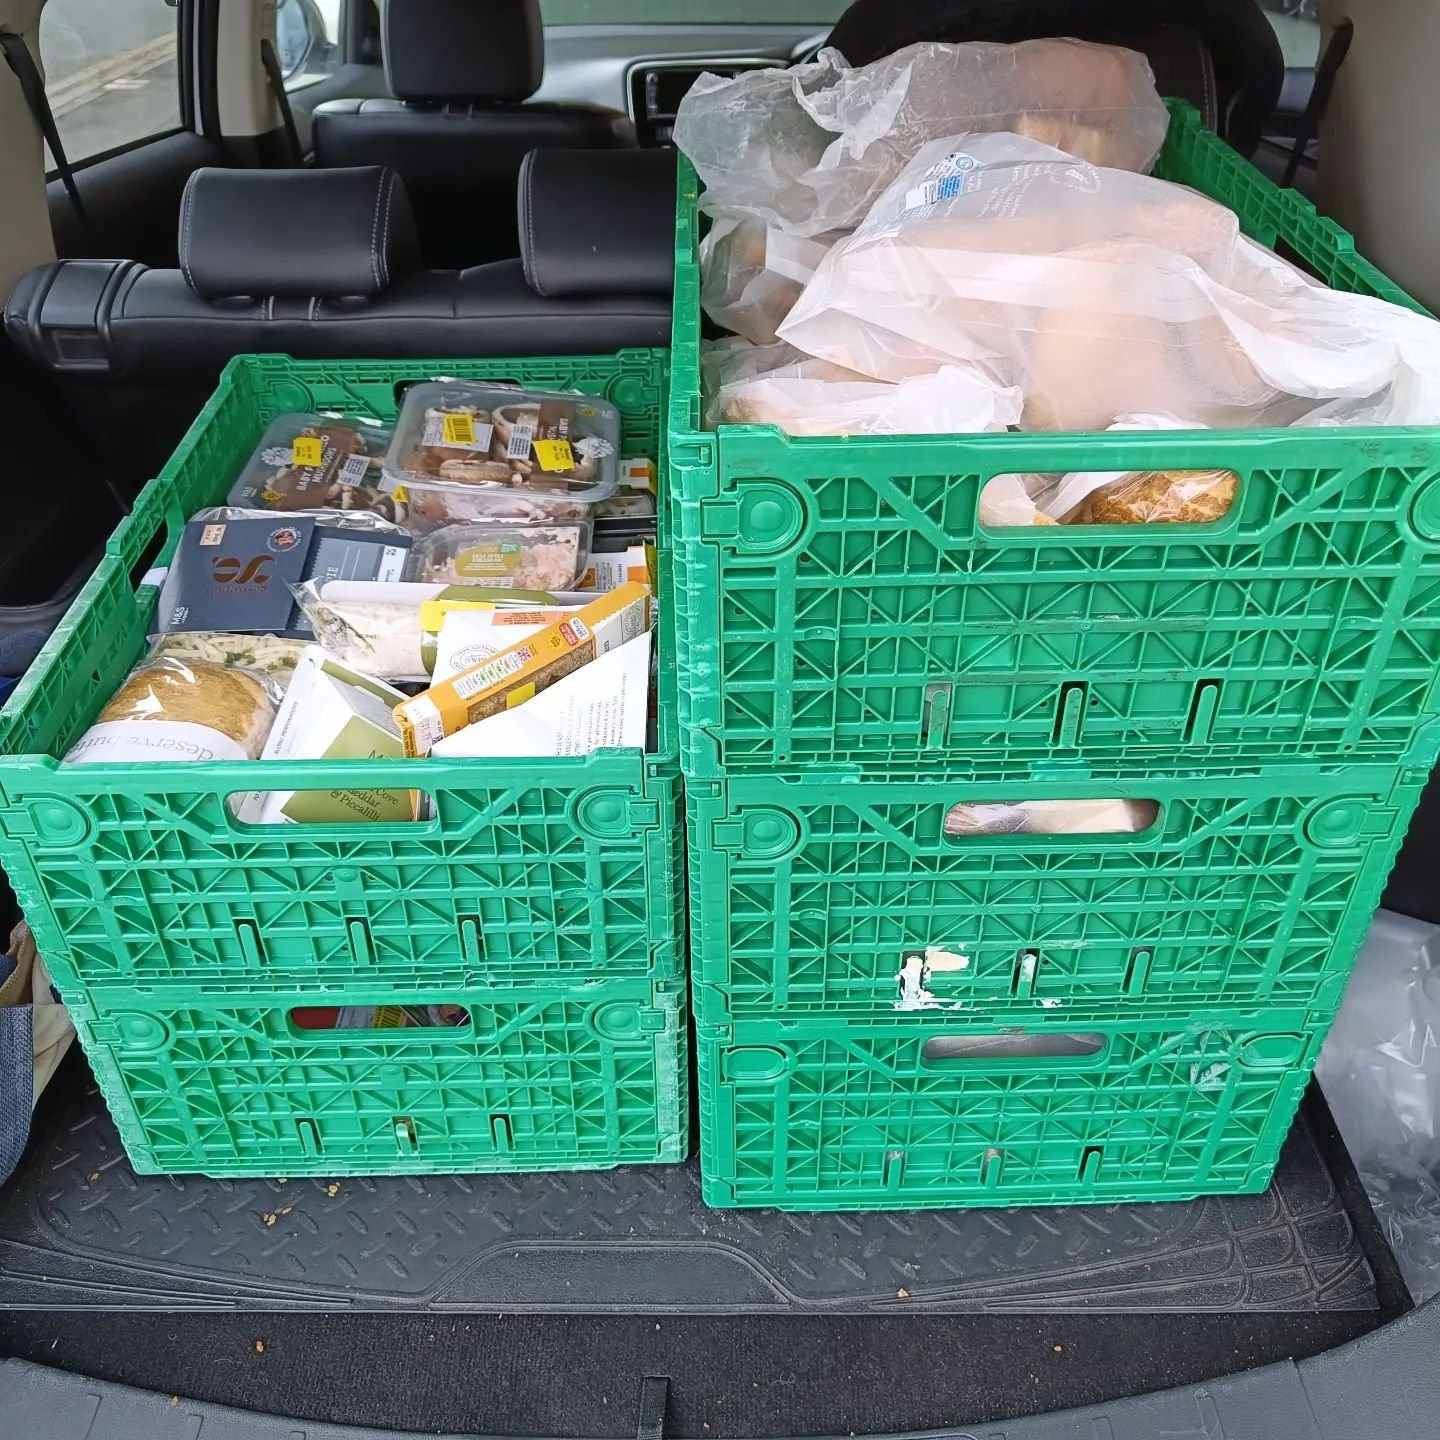 Thank you so much @marksandspencer #readingfriarstreet for this amazing donation today! 5 crates full of food and another crate of fresh flowers which will make our All Day Caf&eacute; look and smell lovely. 

#endfoodpovertyuk #fooddonations #marksa